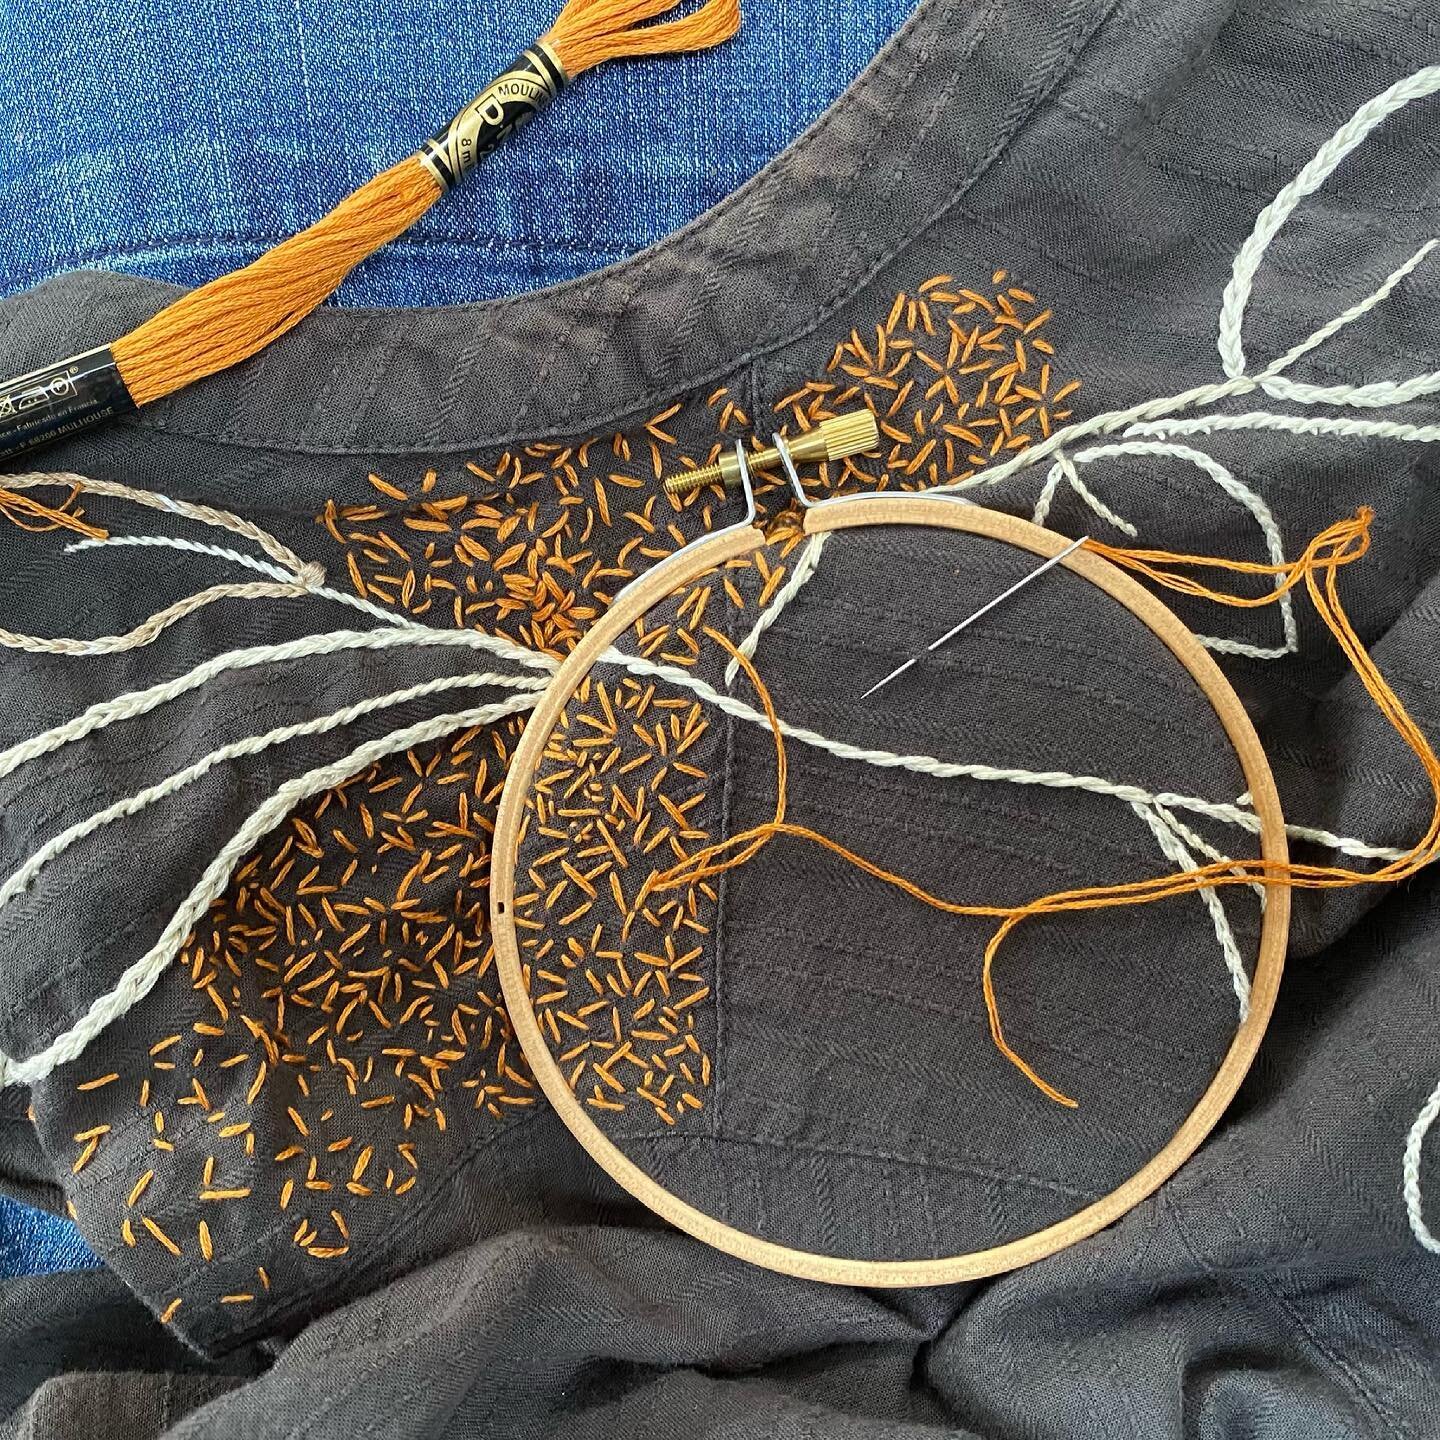 Using a hoop isn&rsquo;t always essential, and I frequently stitch without one. But doing this kind of stitch on a garment was proving quite tricky. The small hoop serves mostly to hold the area I&rsquo;m stitching on away from the various sections o